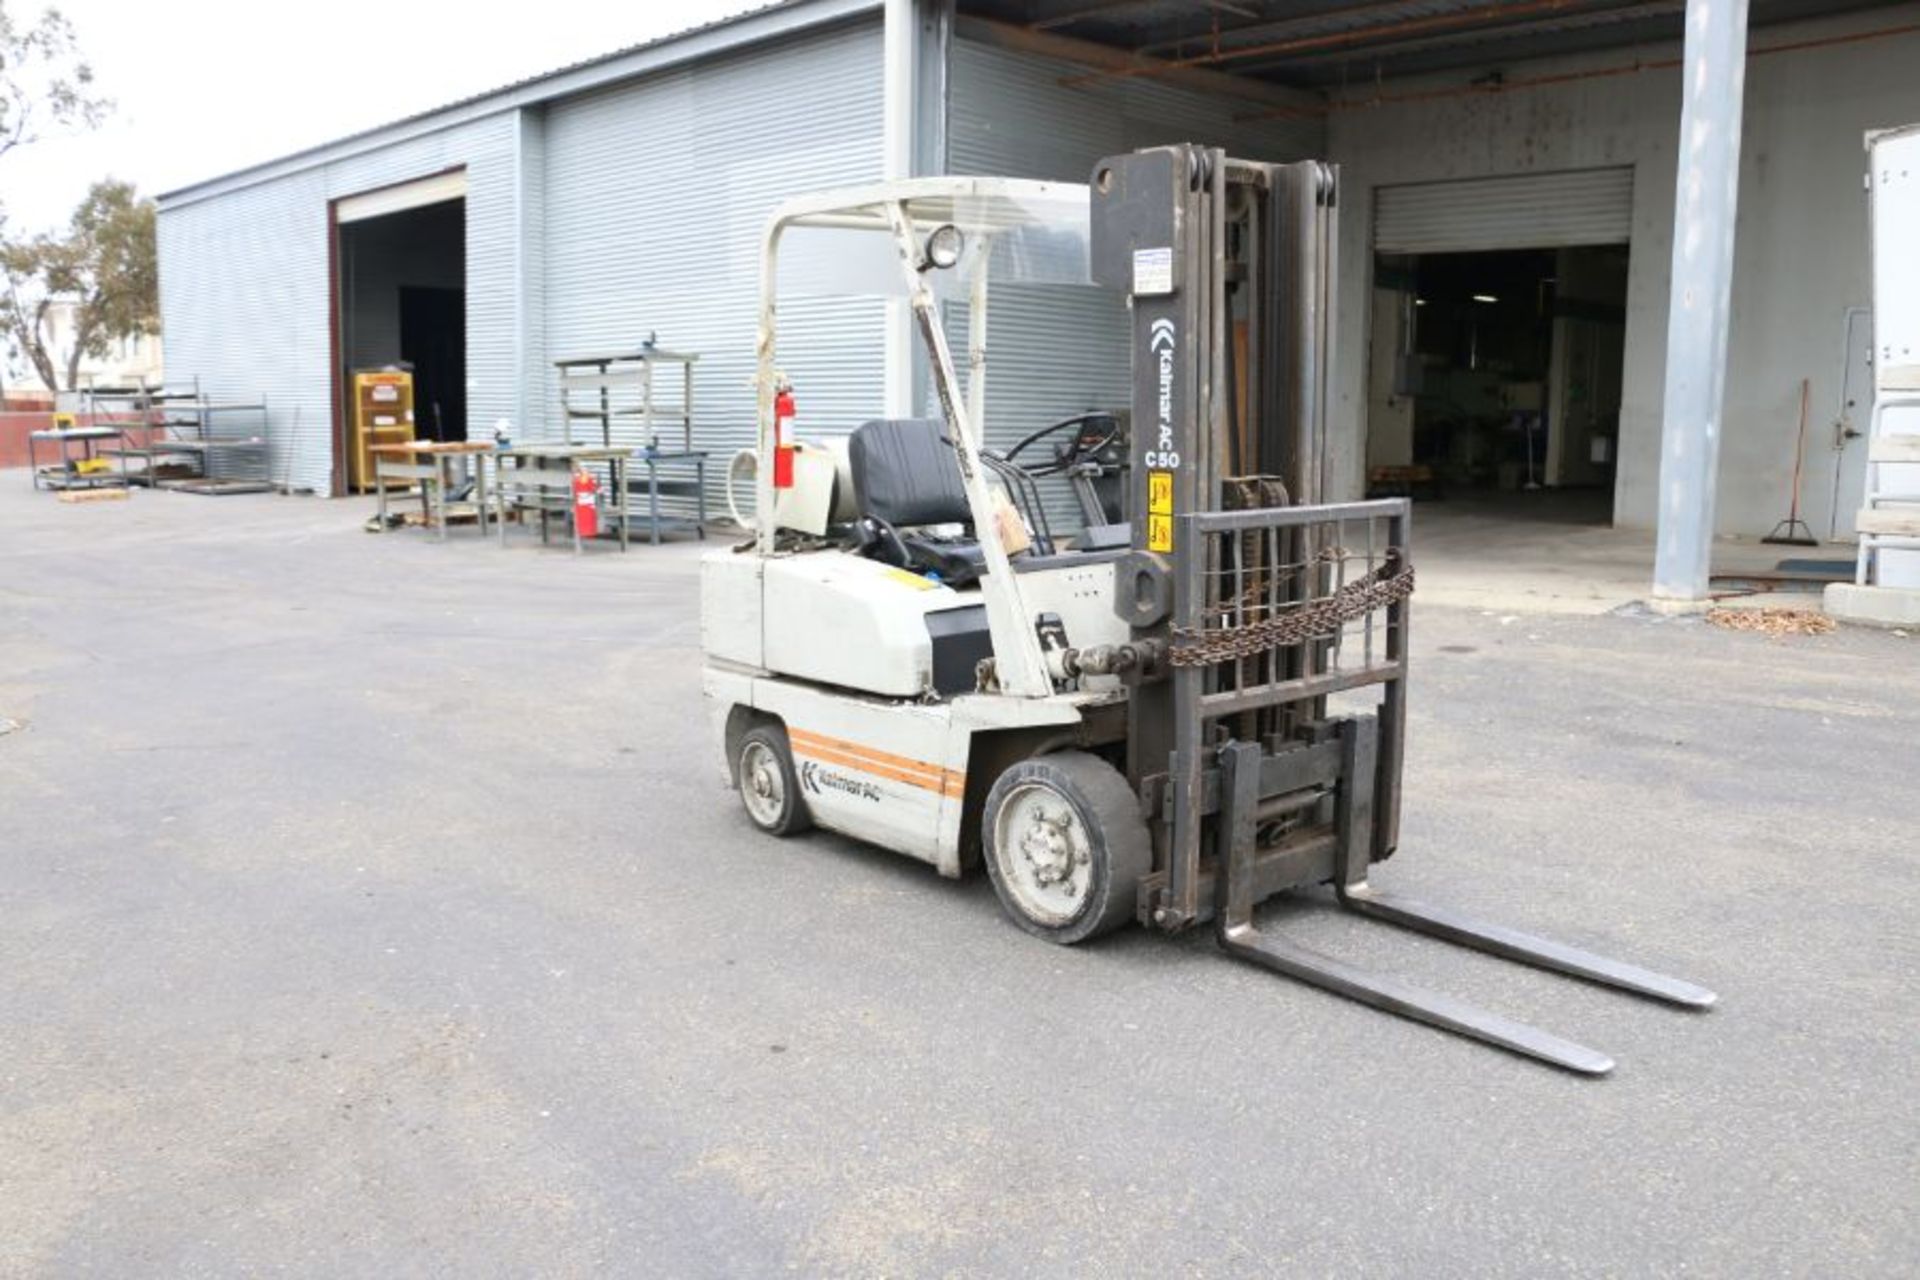 Kalmar C-50 Fork Lift, LPG, 4500 Lbs Cap., 6823 Hrs, s/n 178006A *Late Delivery* - Image 3 of 6